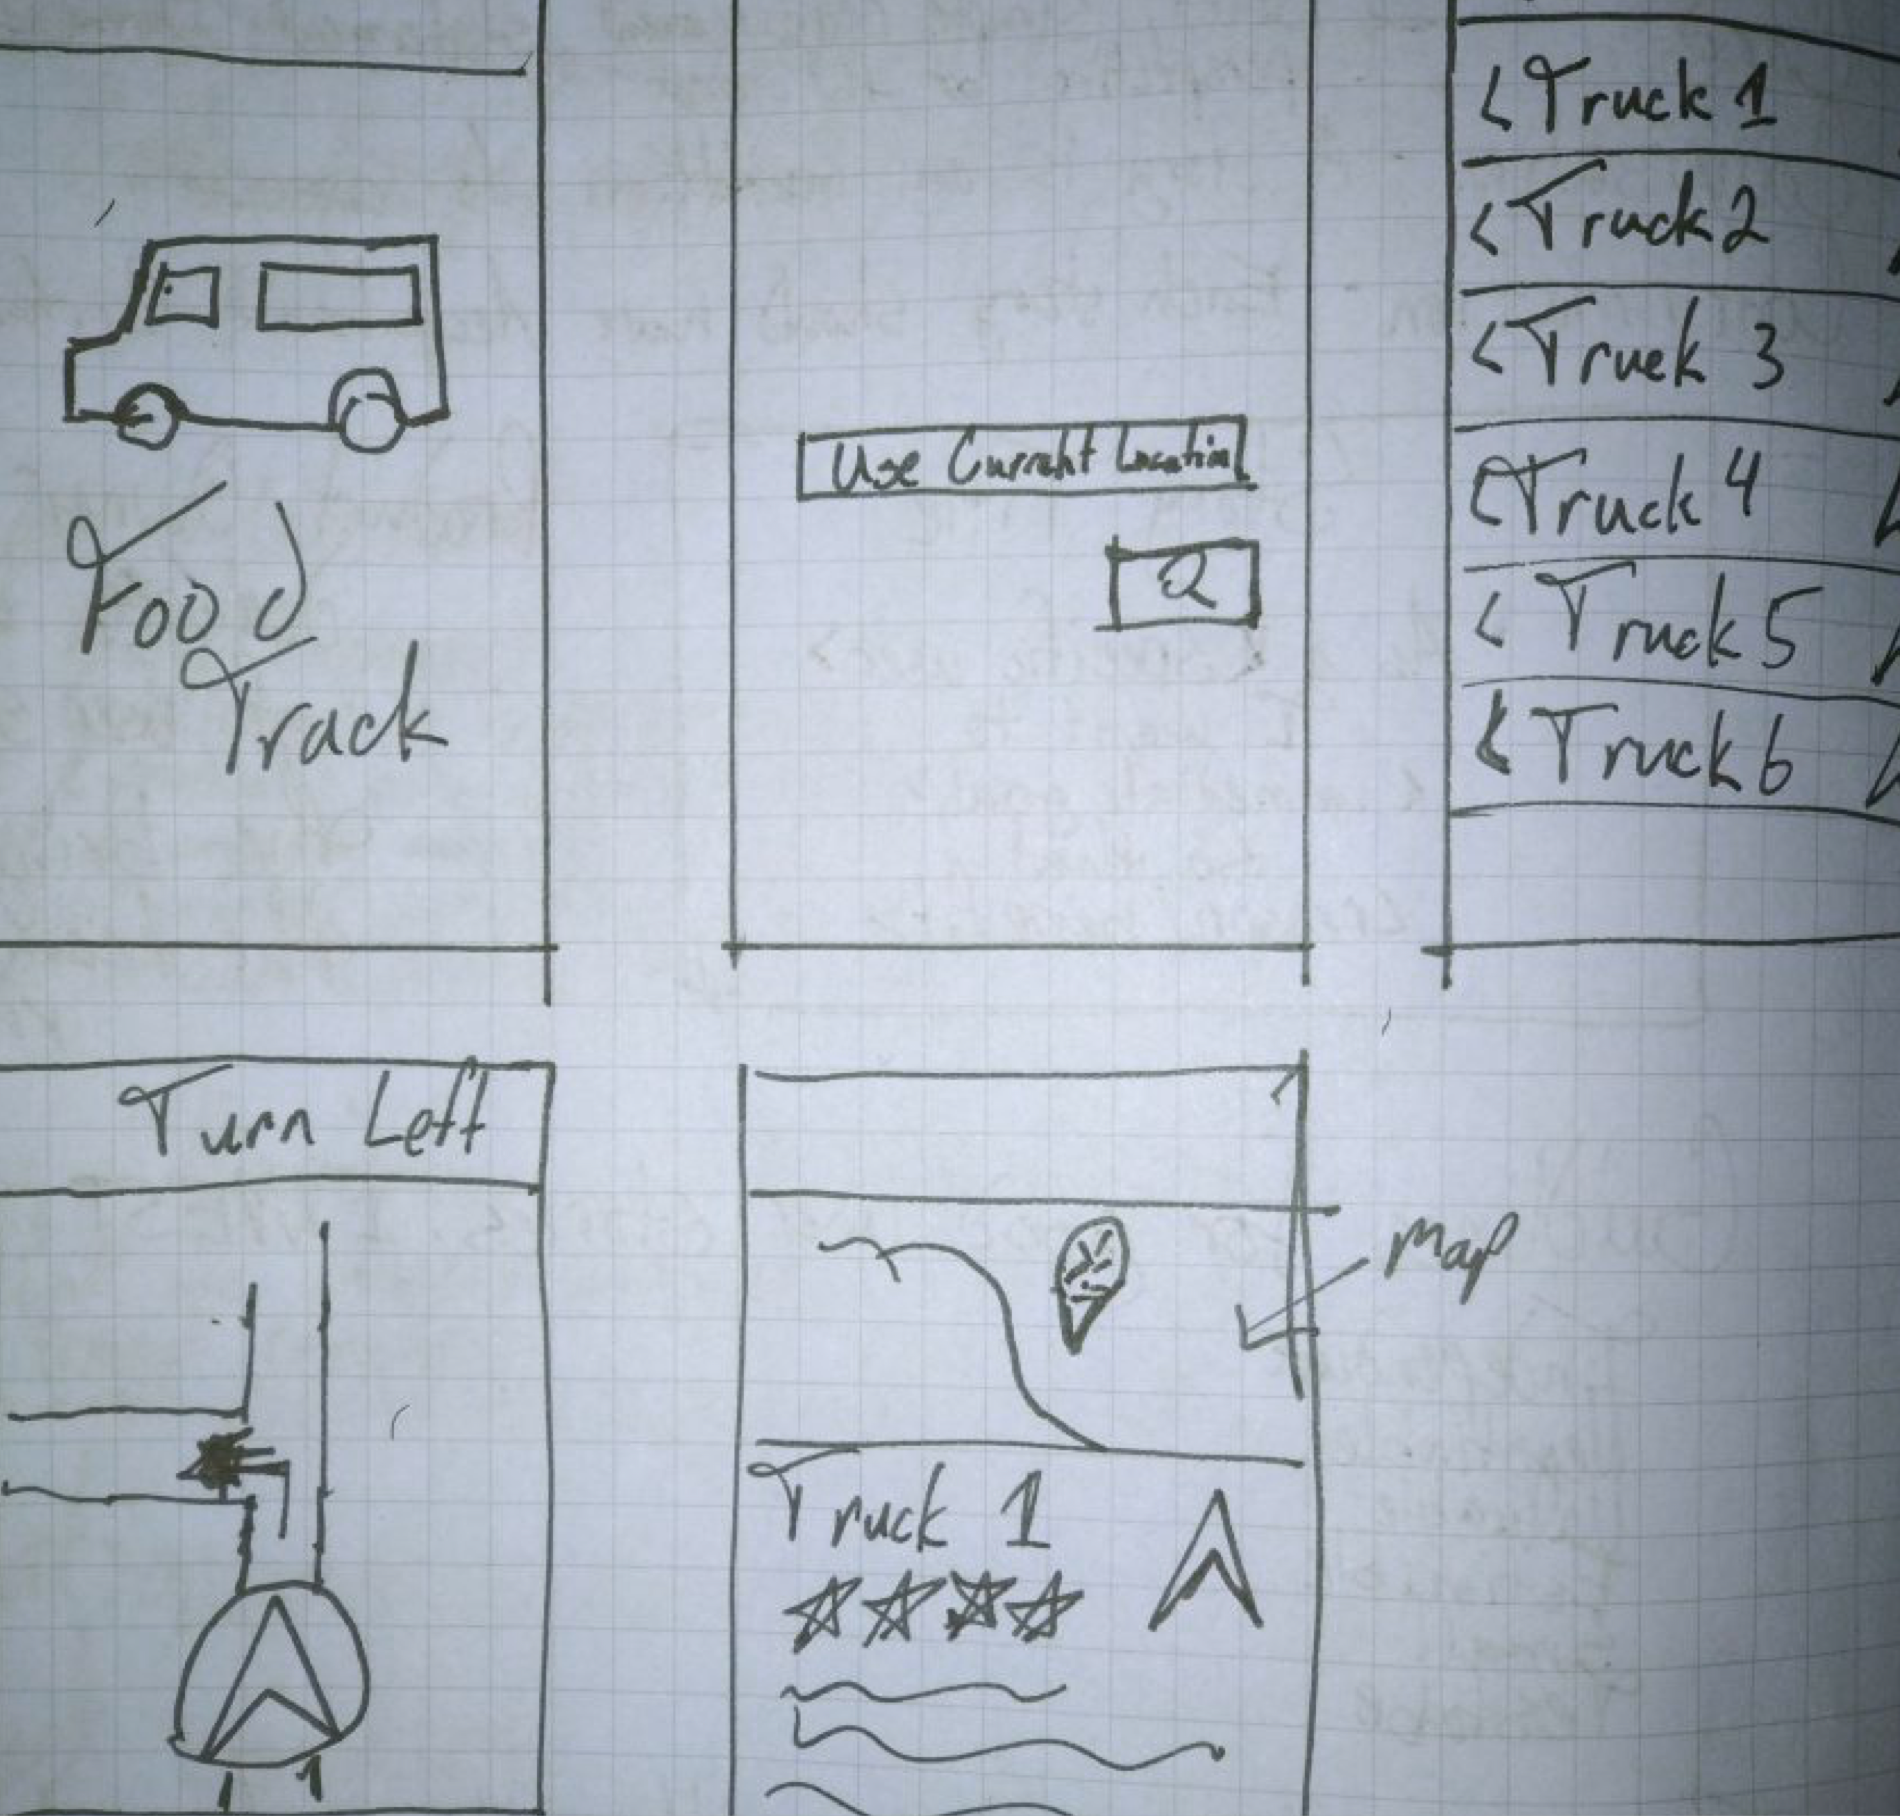 Sketched wires of how the app could look.